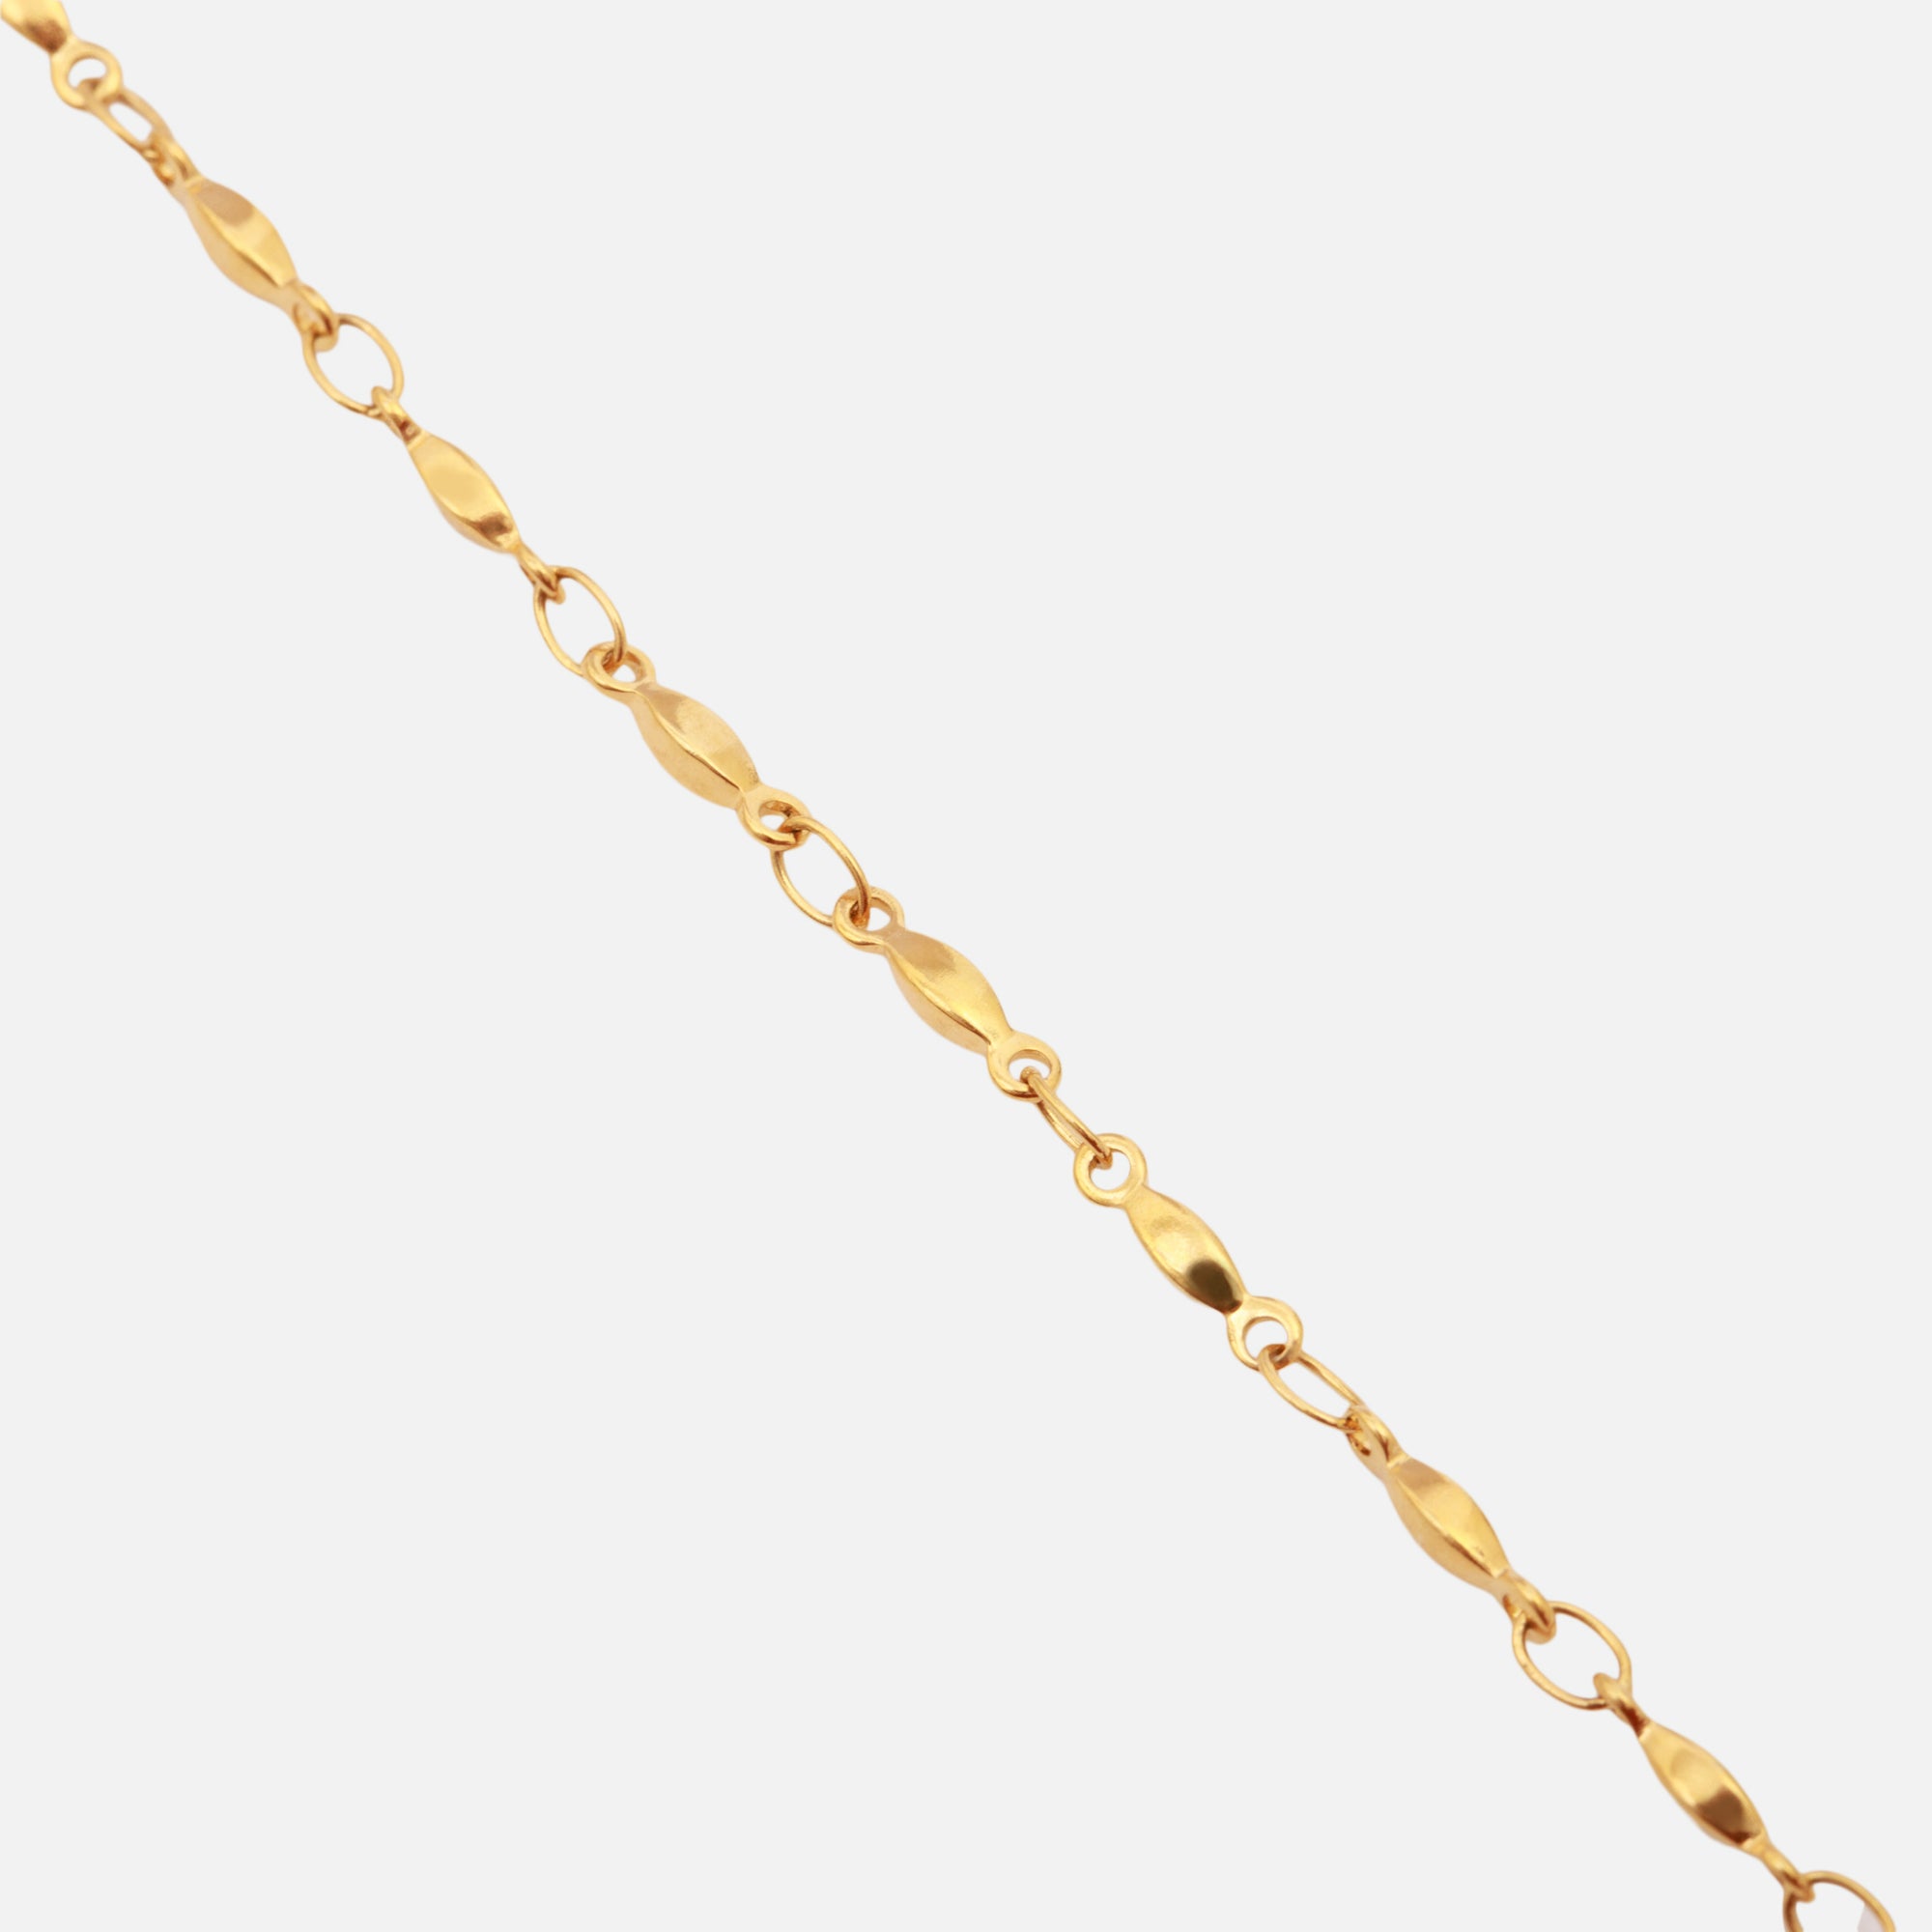 Golden stainless steel ankle chain